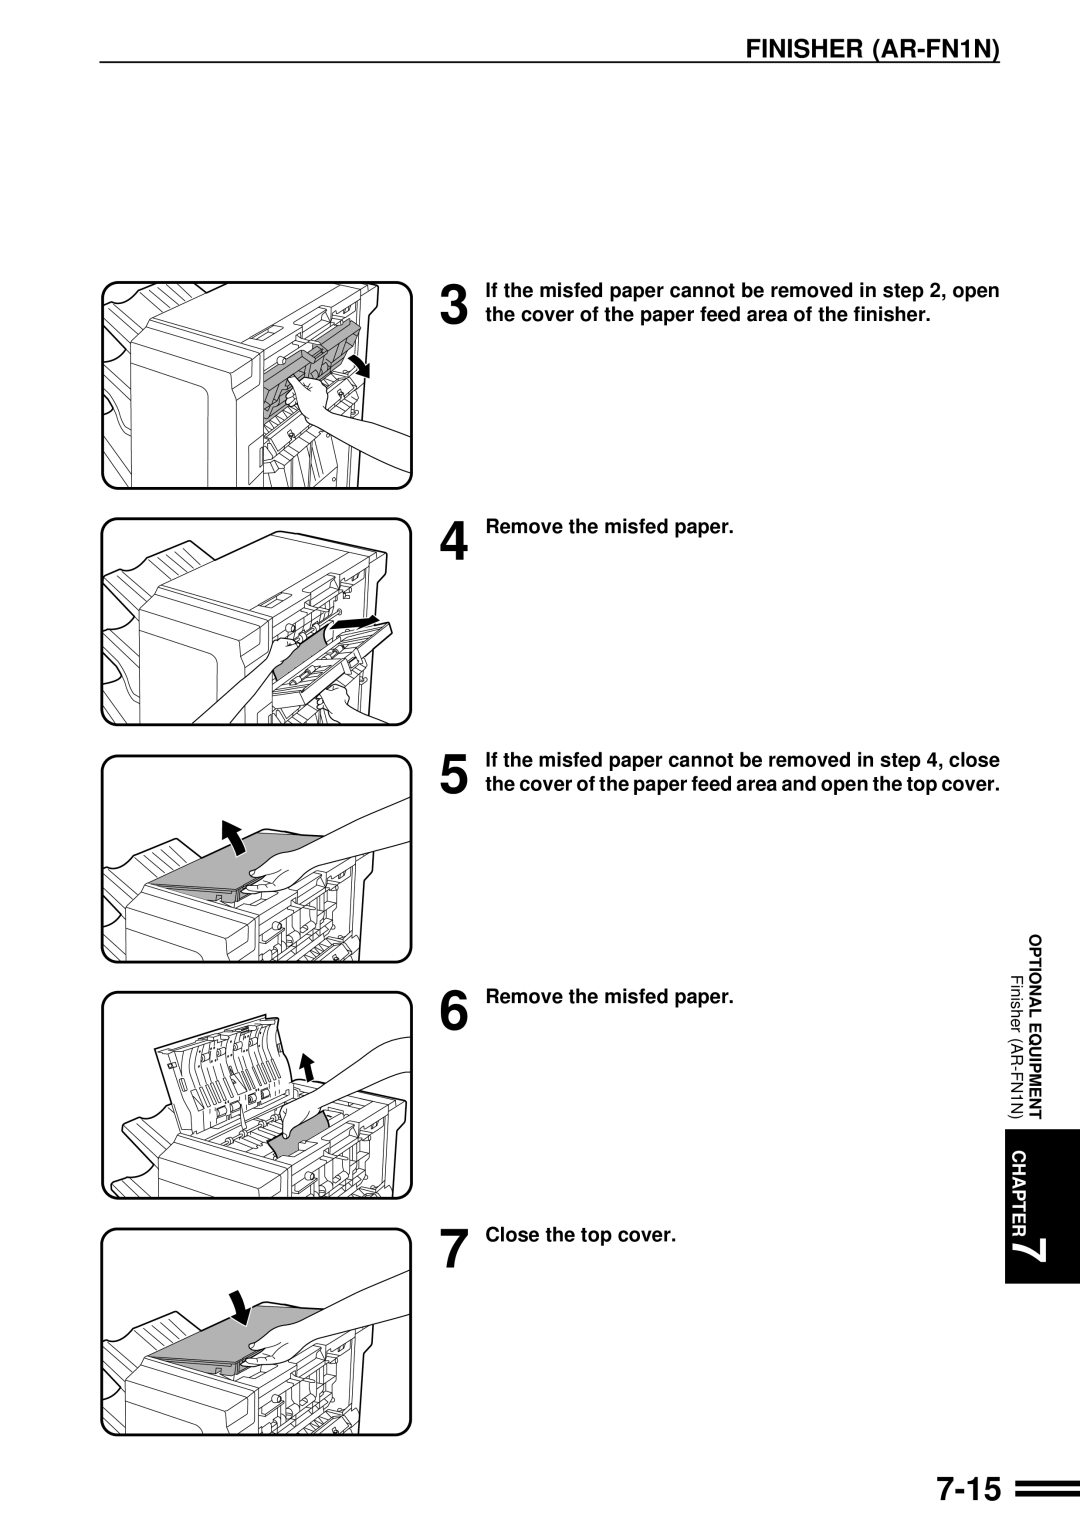 Sharp AR-287 manual 7-15, If the misfed paper cannot be removed in , open, the cover of the paper feed area of the finisher 